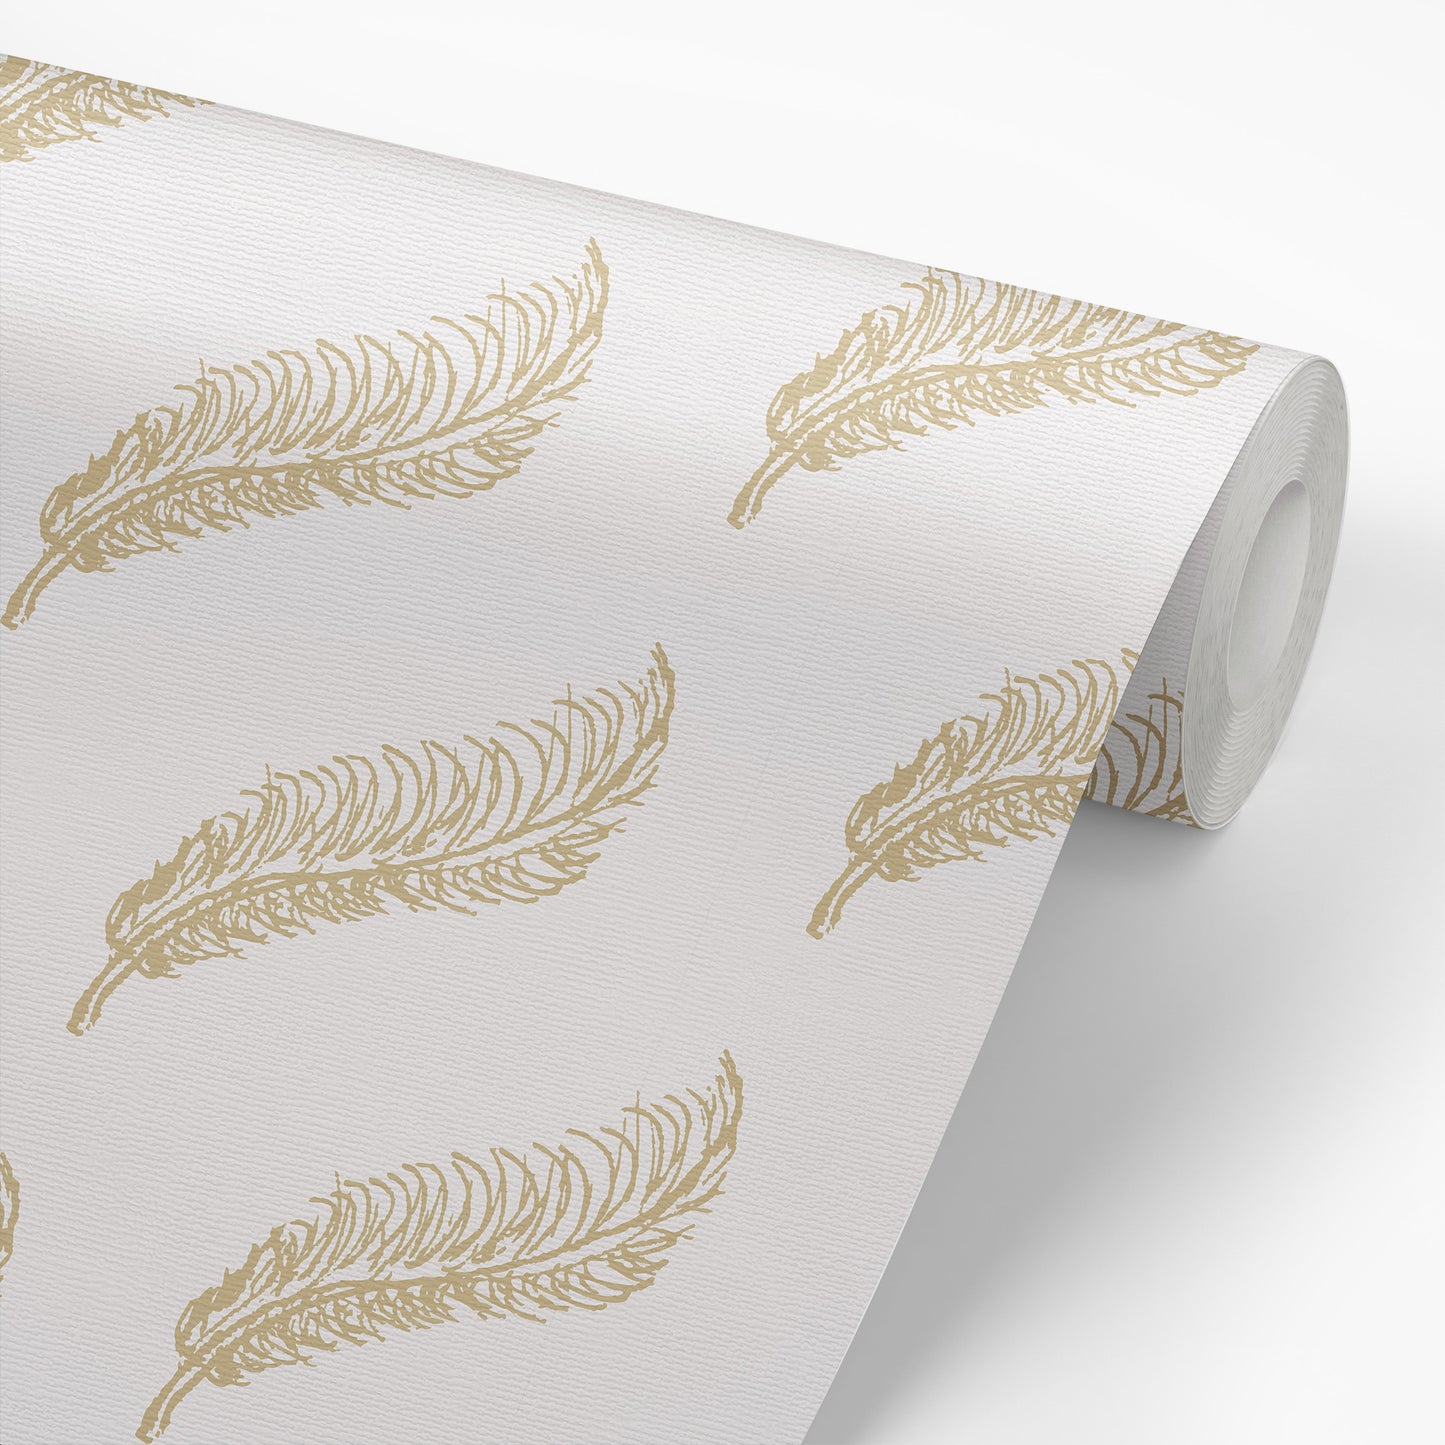 Feathers- White and Gold